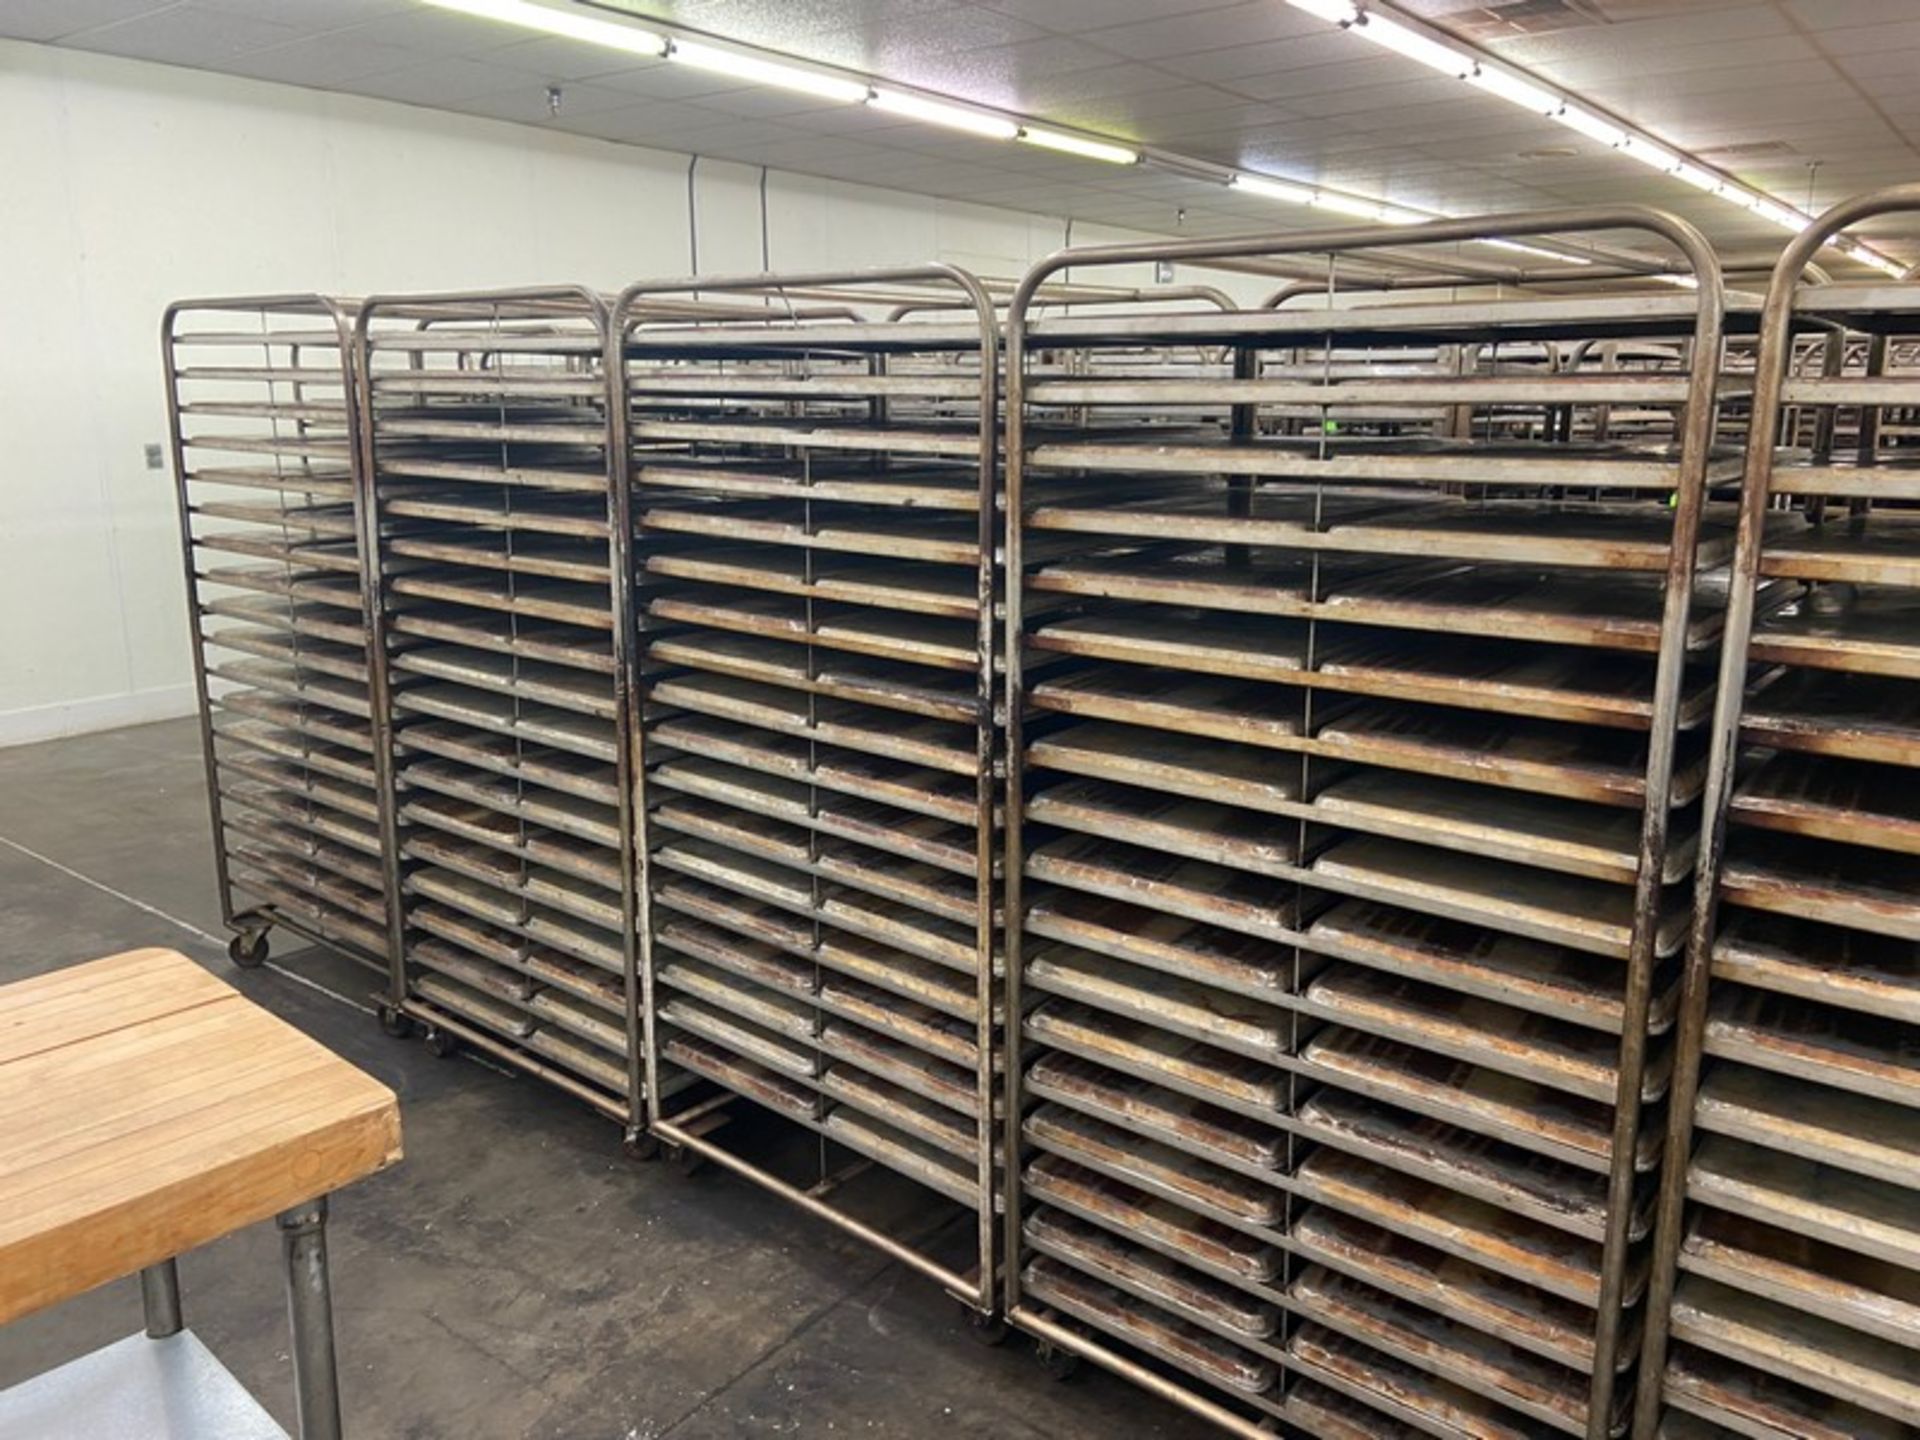 (5) PORTABLE DOUBLE SIDED BAKING PAN RACKS, MOUNTED ON CASTERS (LOCATED IN HERMITAGE, PA) - Image 2 of 3